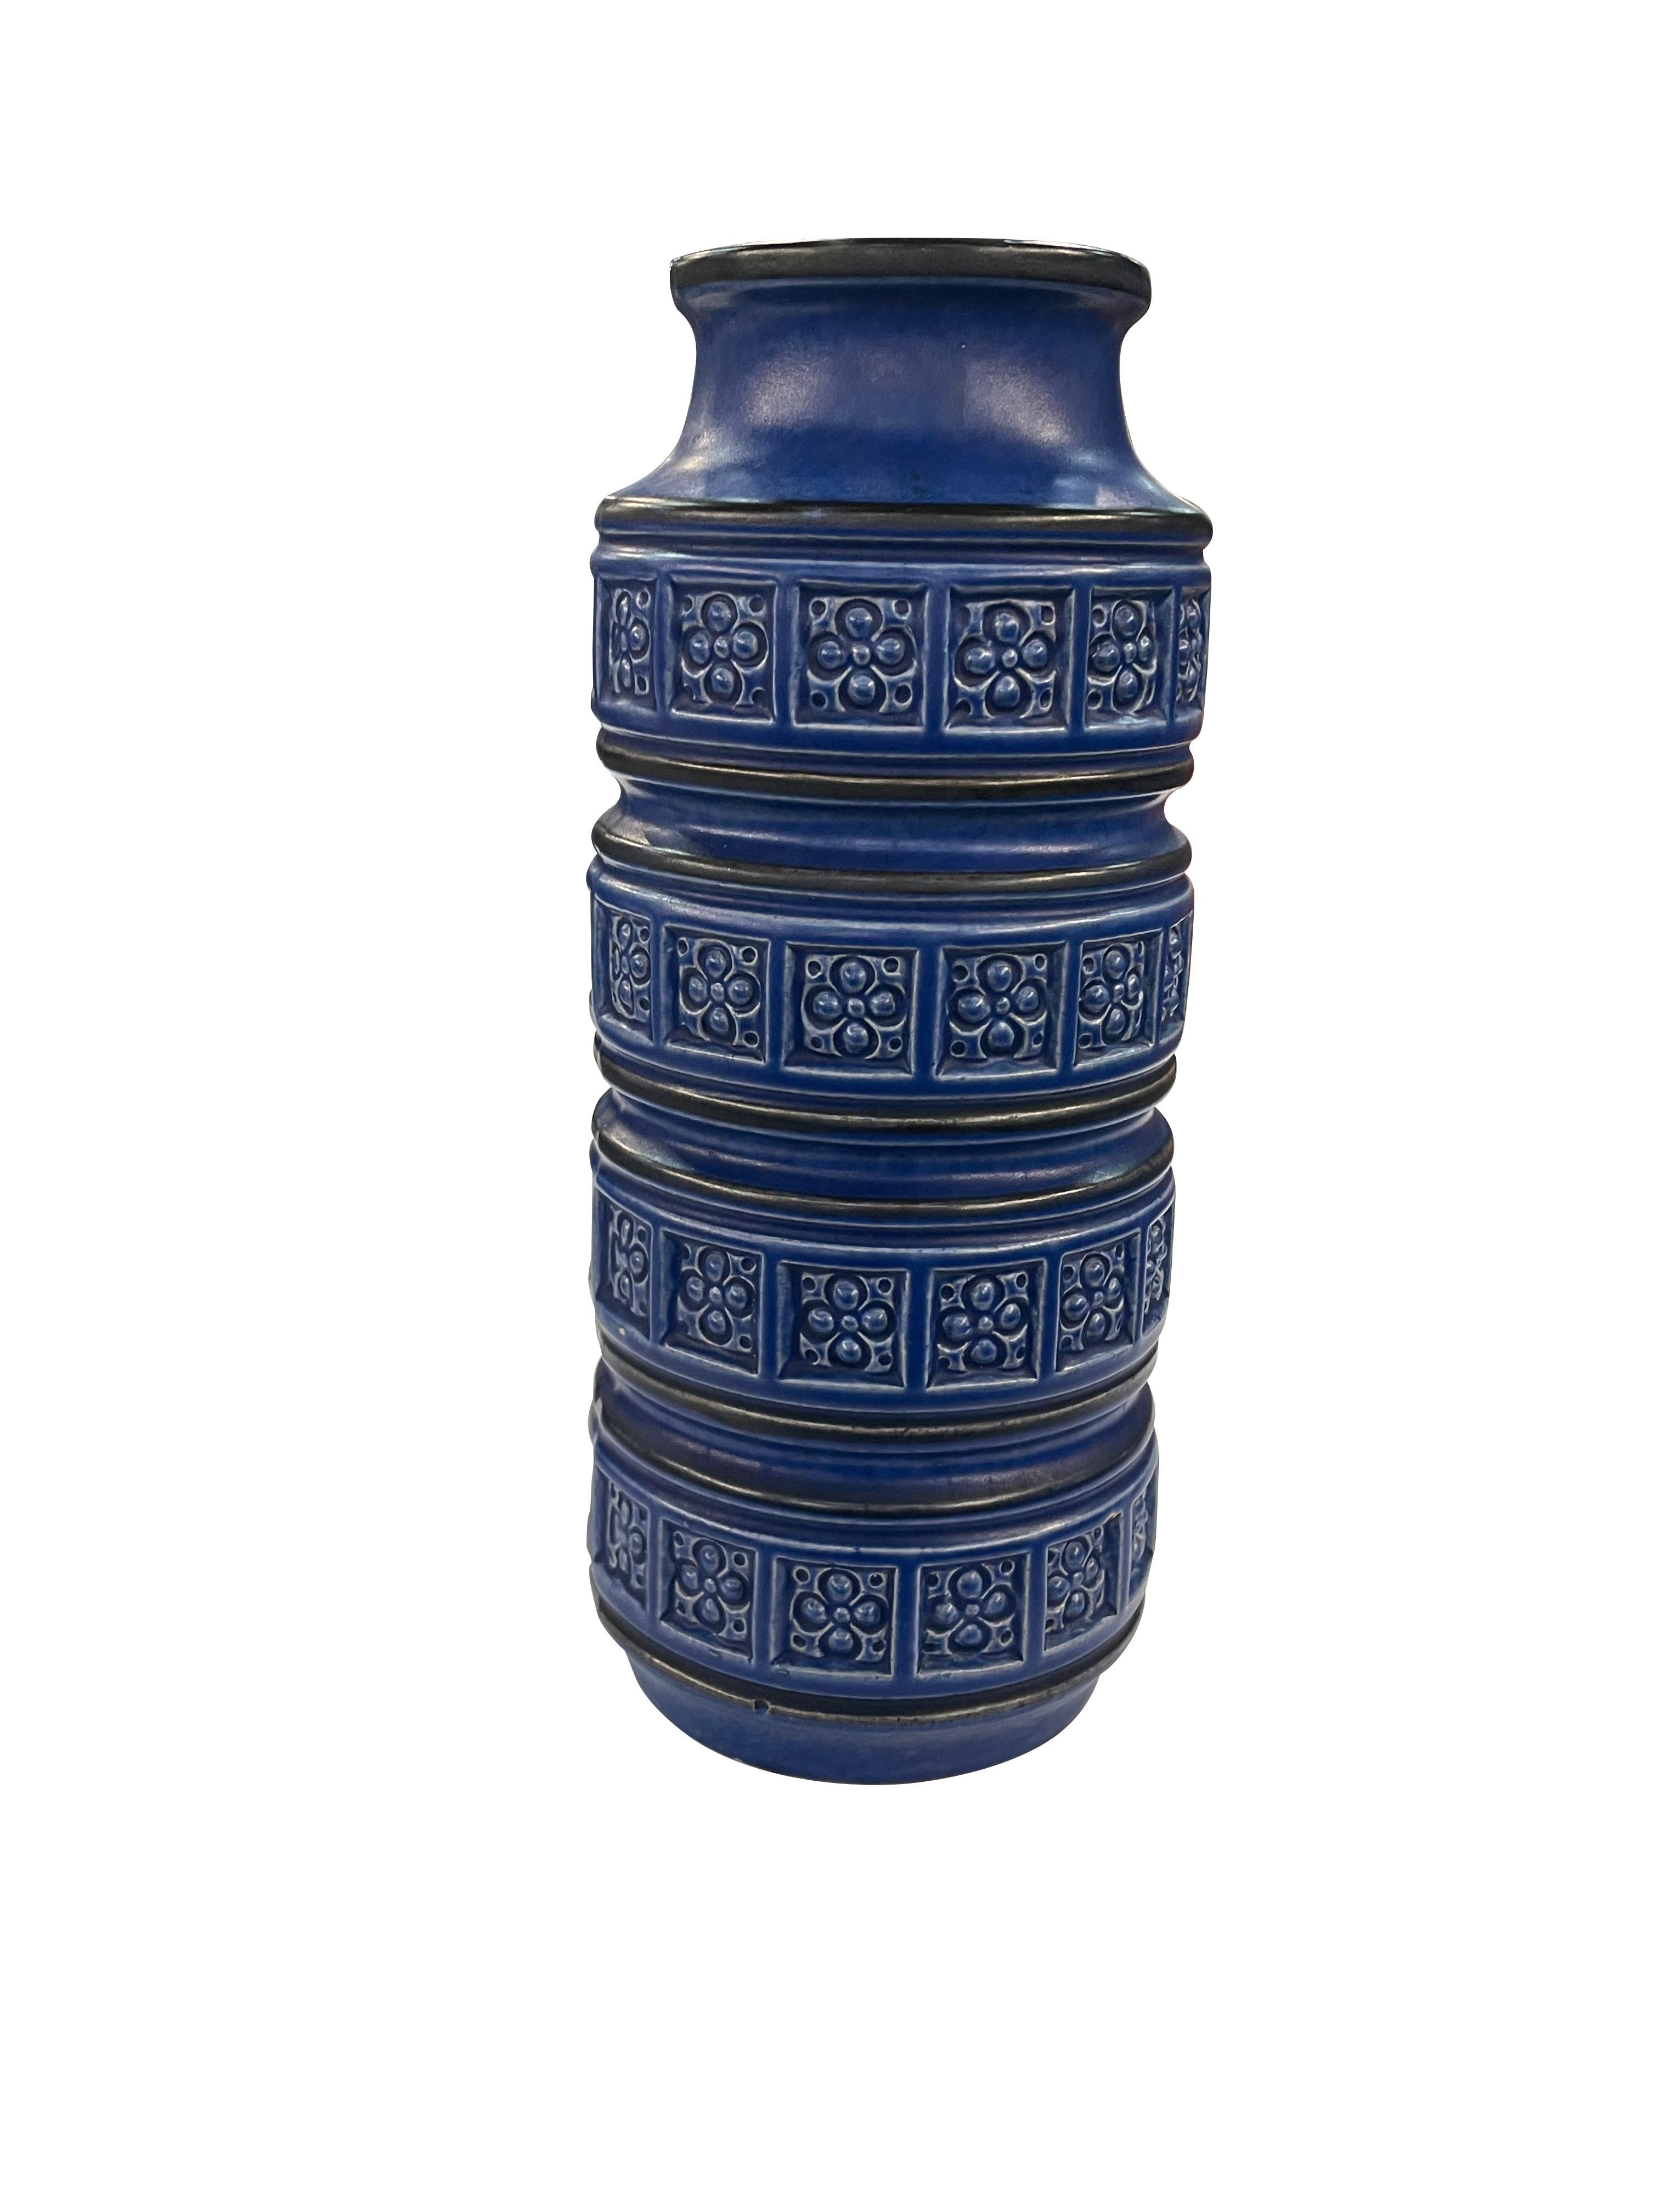 Mid Century German ceramic vase with horizontal bands of raised geometric design.
Cobalt blue in color.
Can hold water.
Sits well with S6756 and S6758.
ARRIVING APRIL